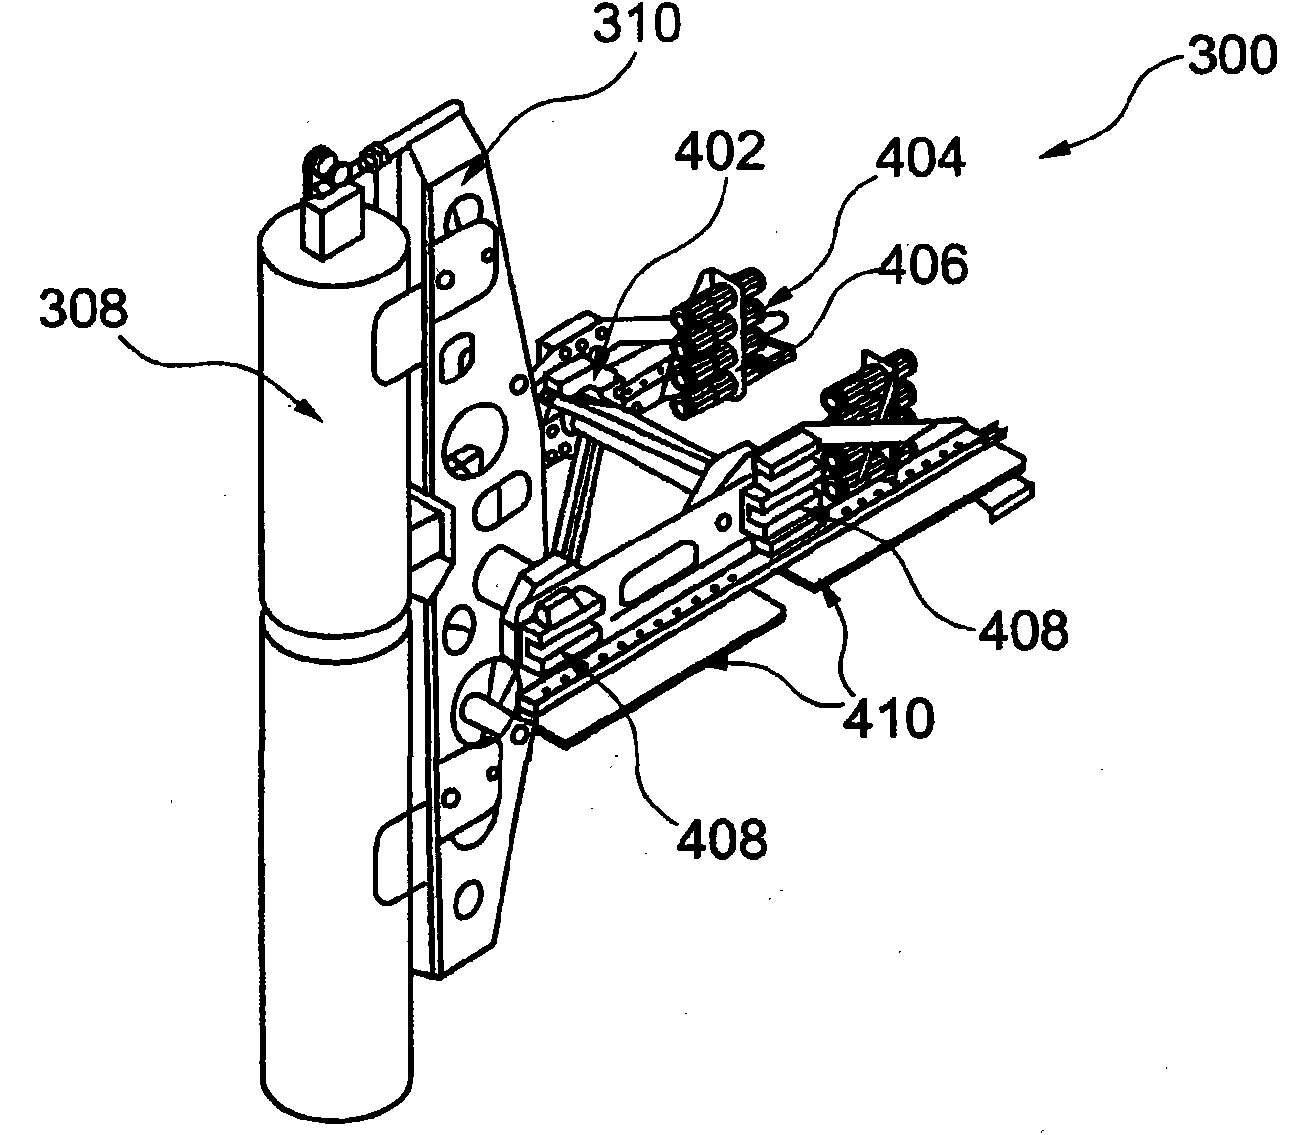 System for investigating collisions between test body and physical structure